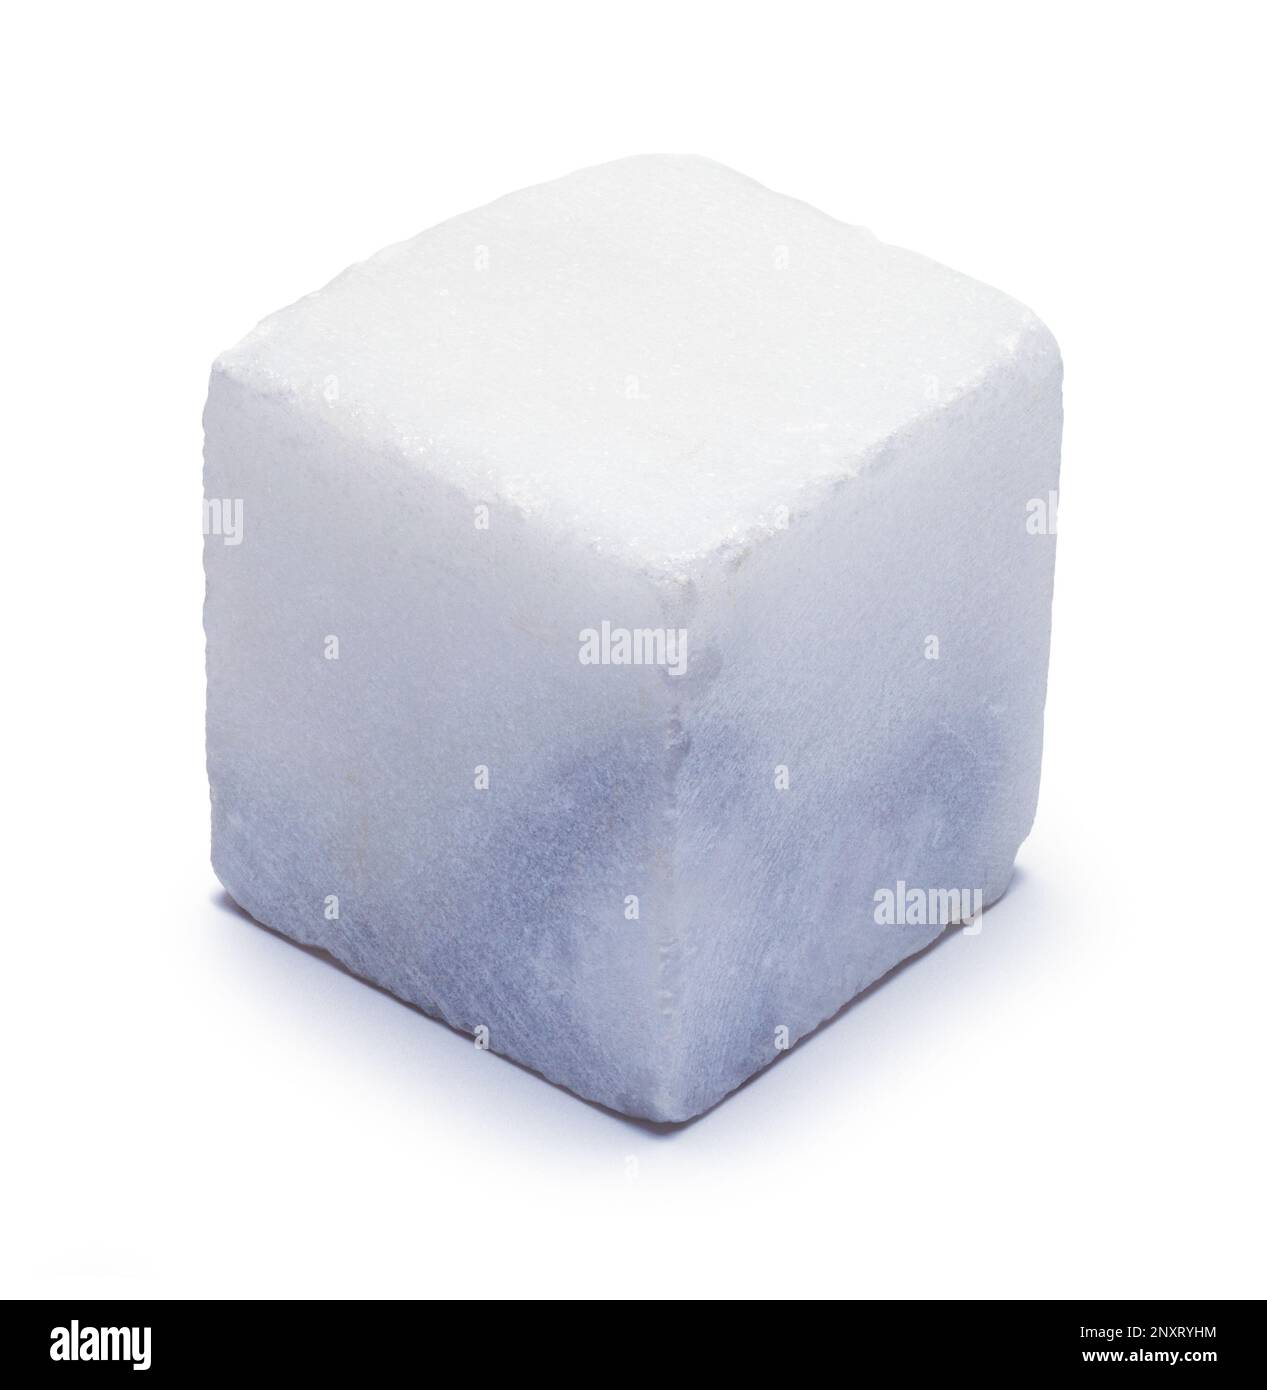 Square Marble Block Cut Out on White. Stock Photo